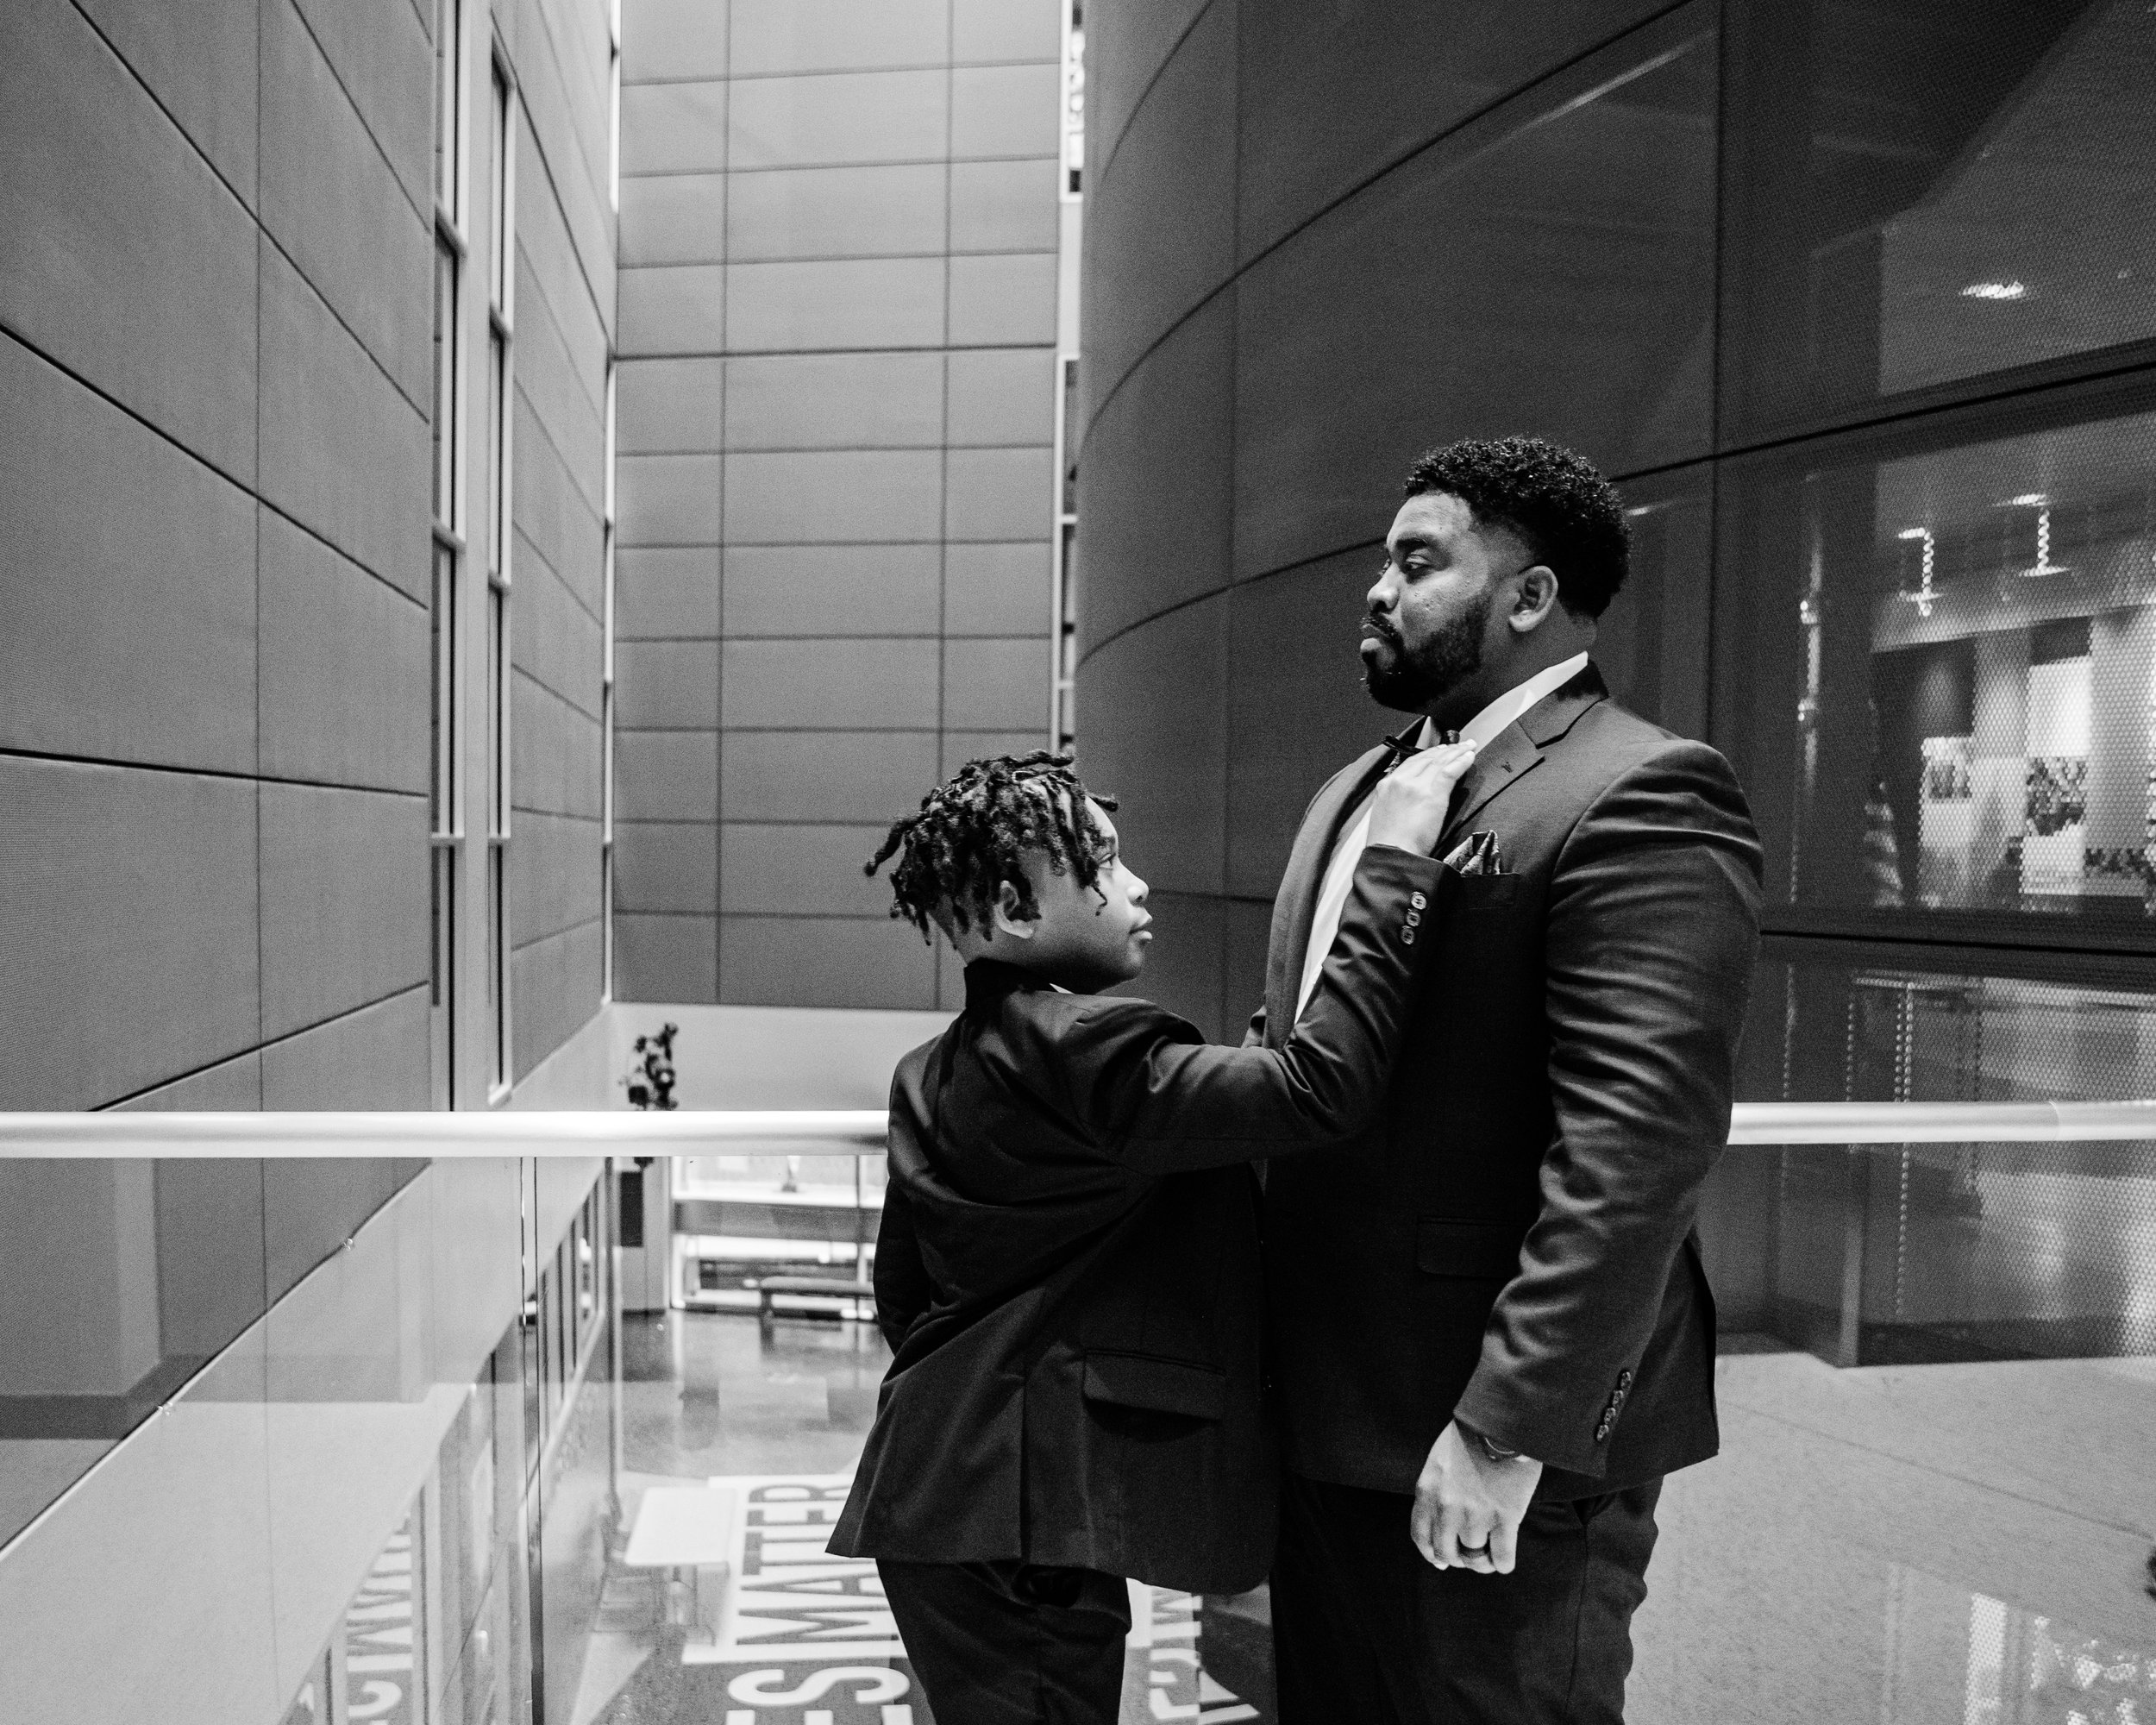 Father and Son Black History Portraits at the Reginald Lewis Museum Baltimore Maryland Megapixels Media-4.jpg